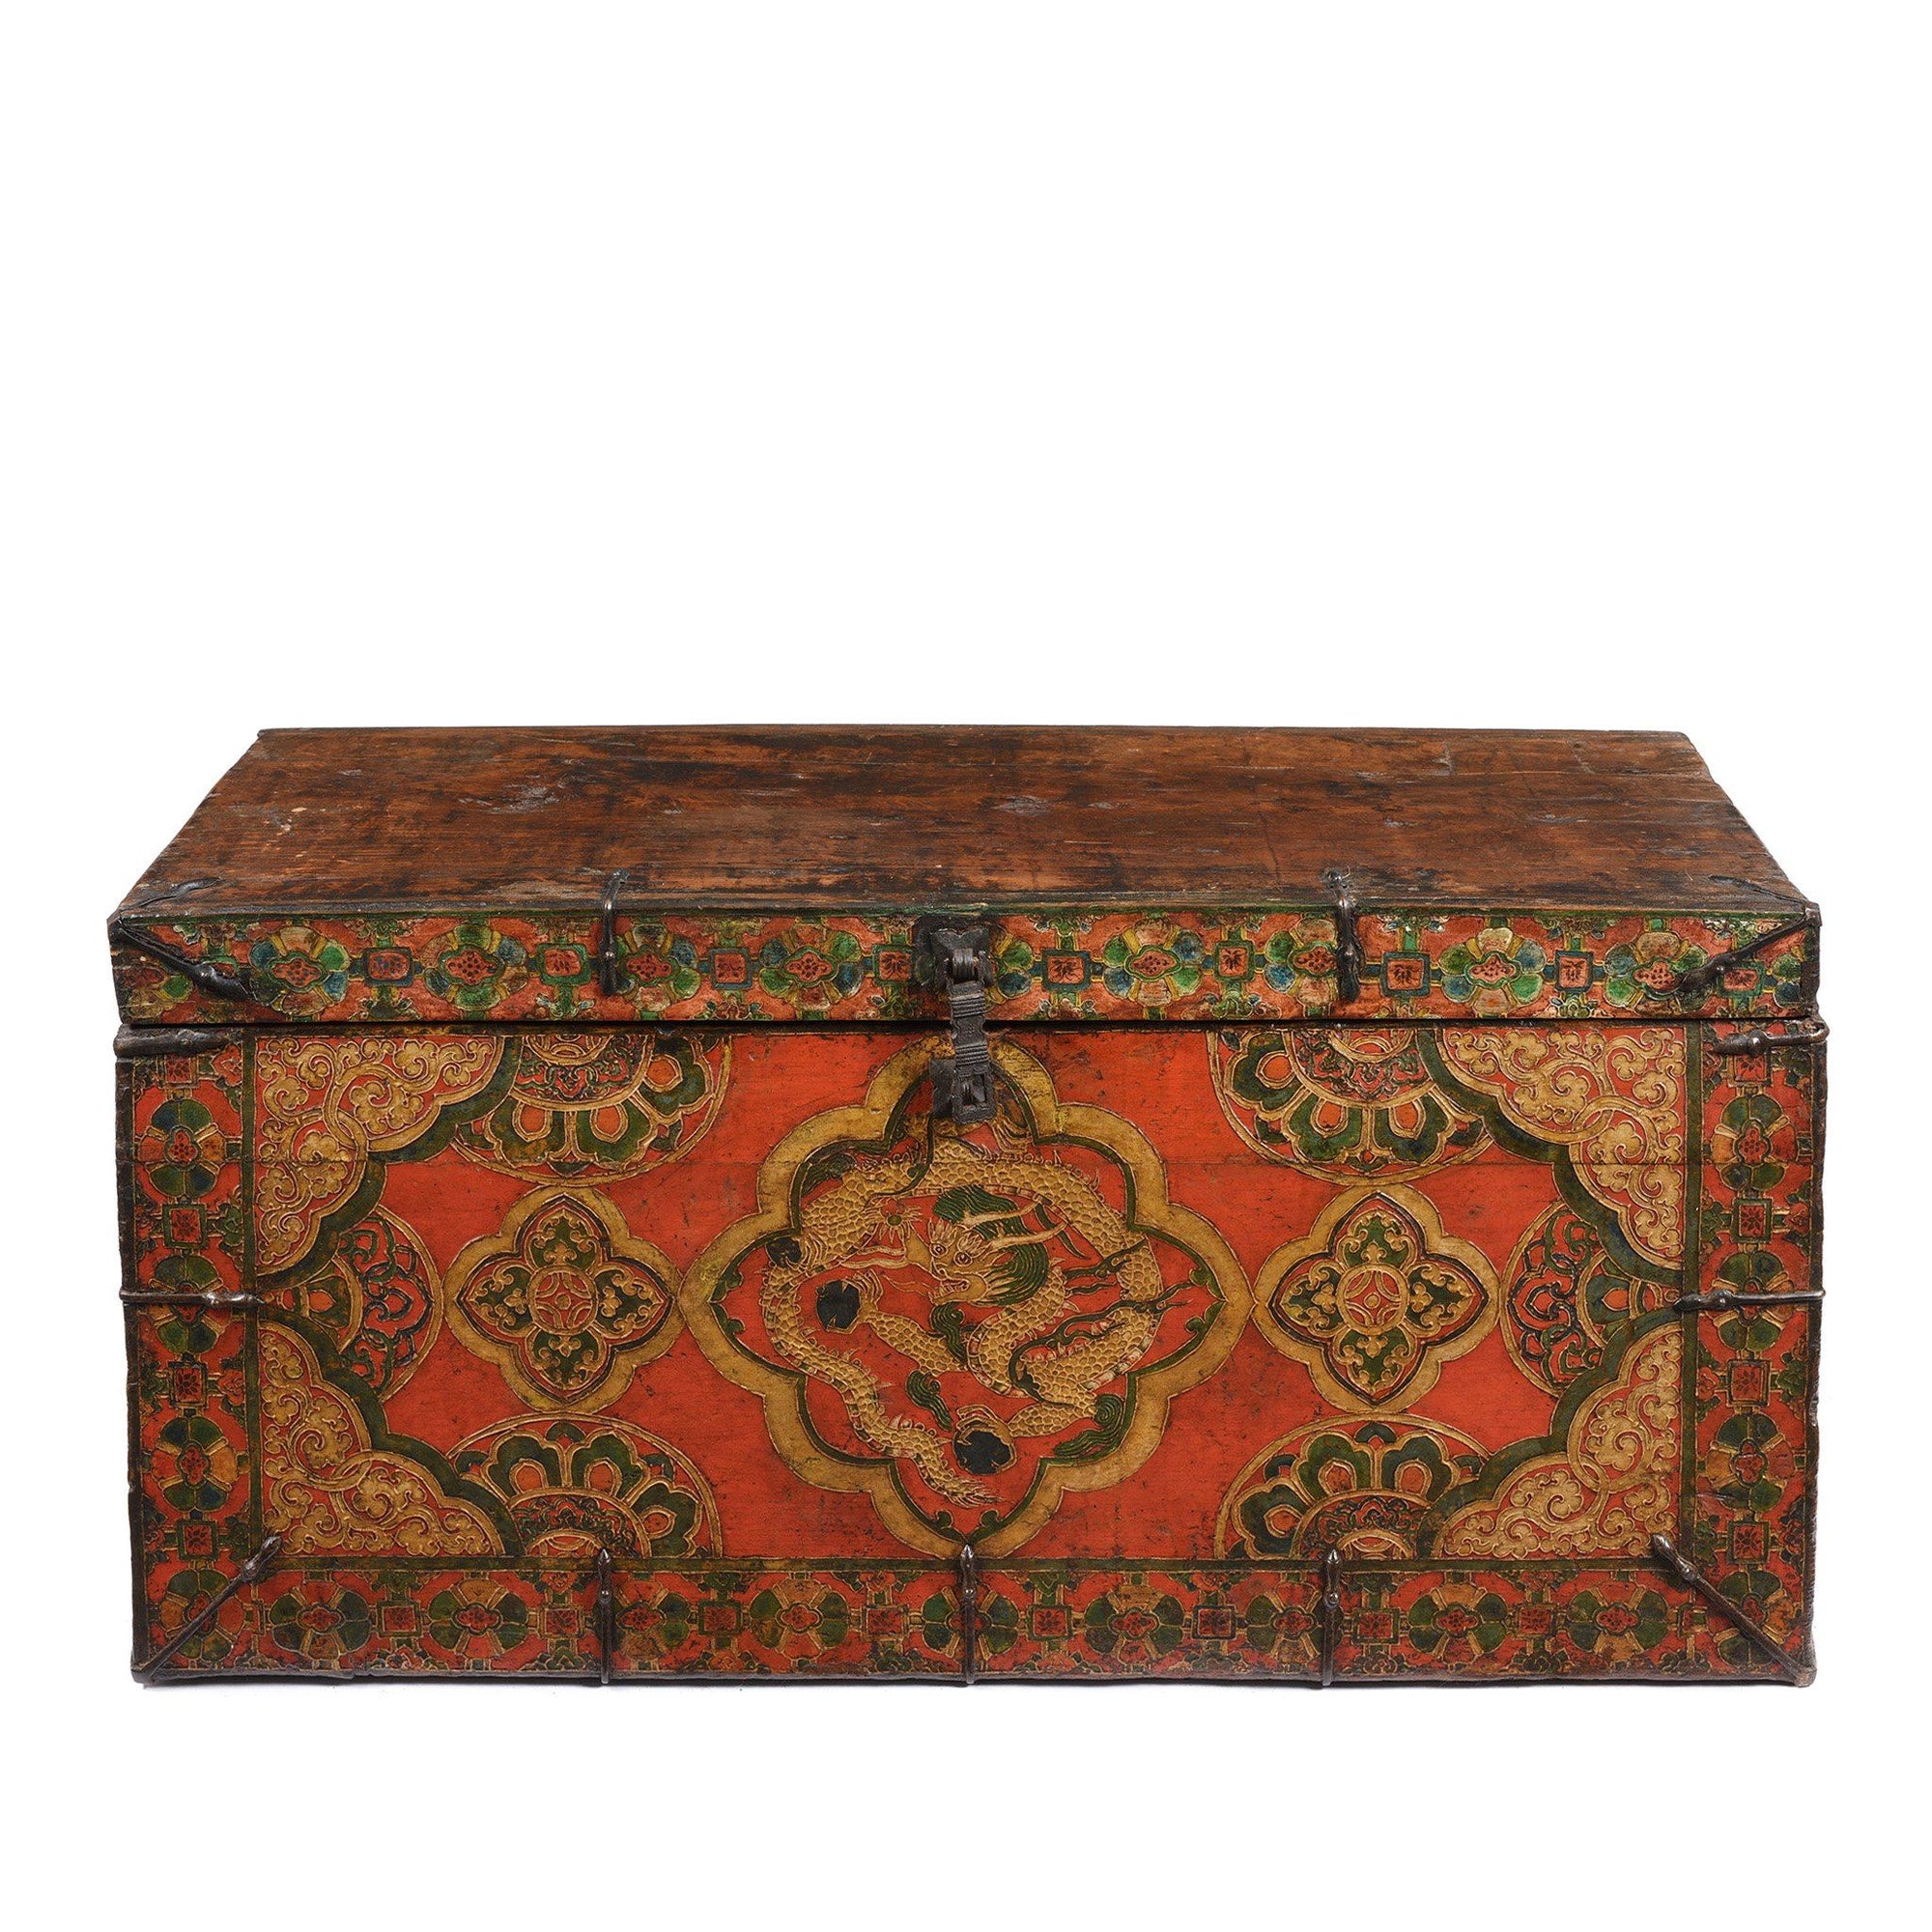 An antique Tibetan Dragon Chest Bound with Iron and covered in Double Dorje & Cloud Symbols | Indigo Antiques